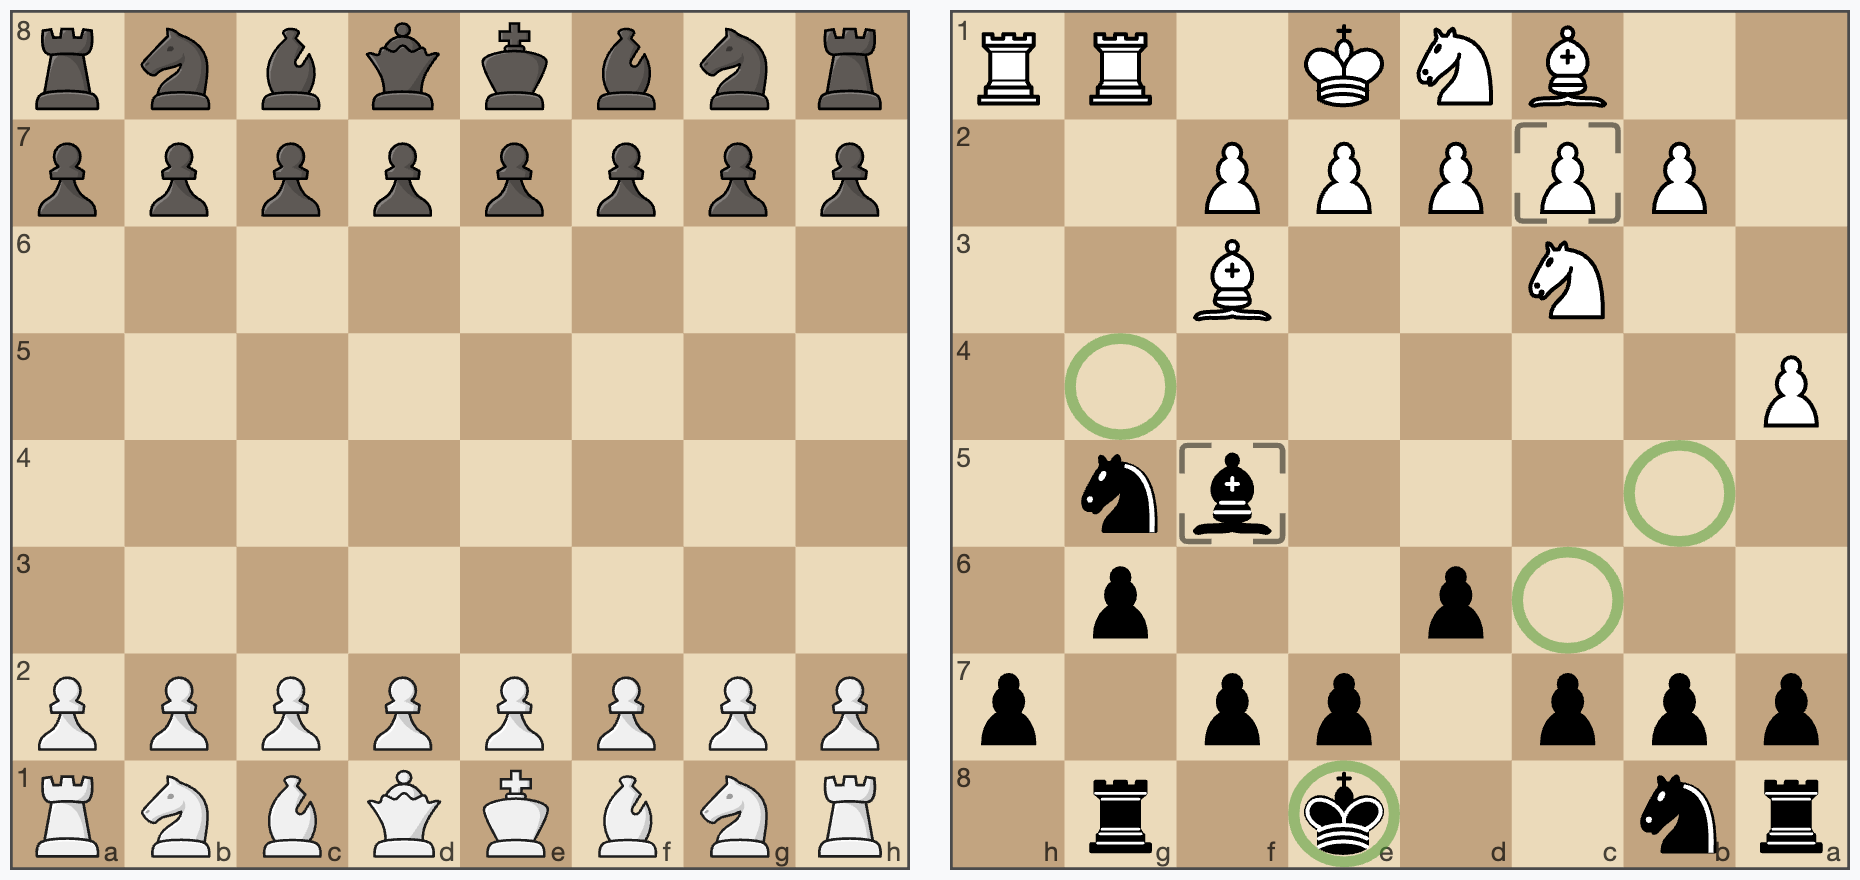 Example chessboards